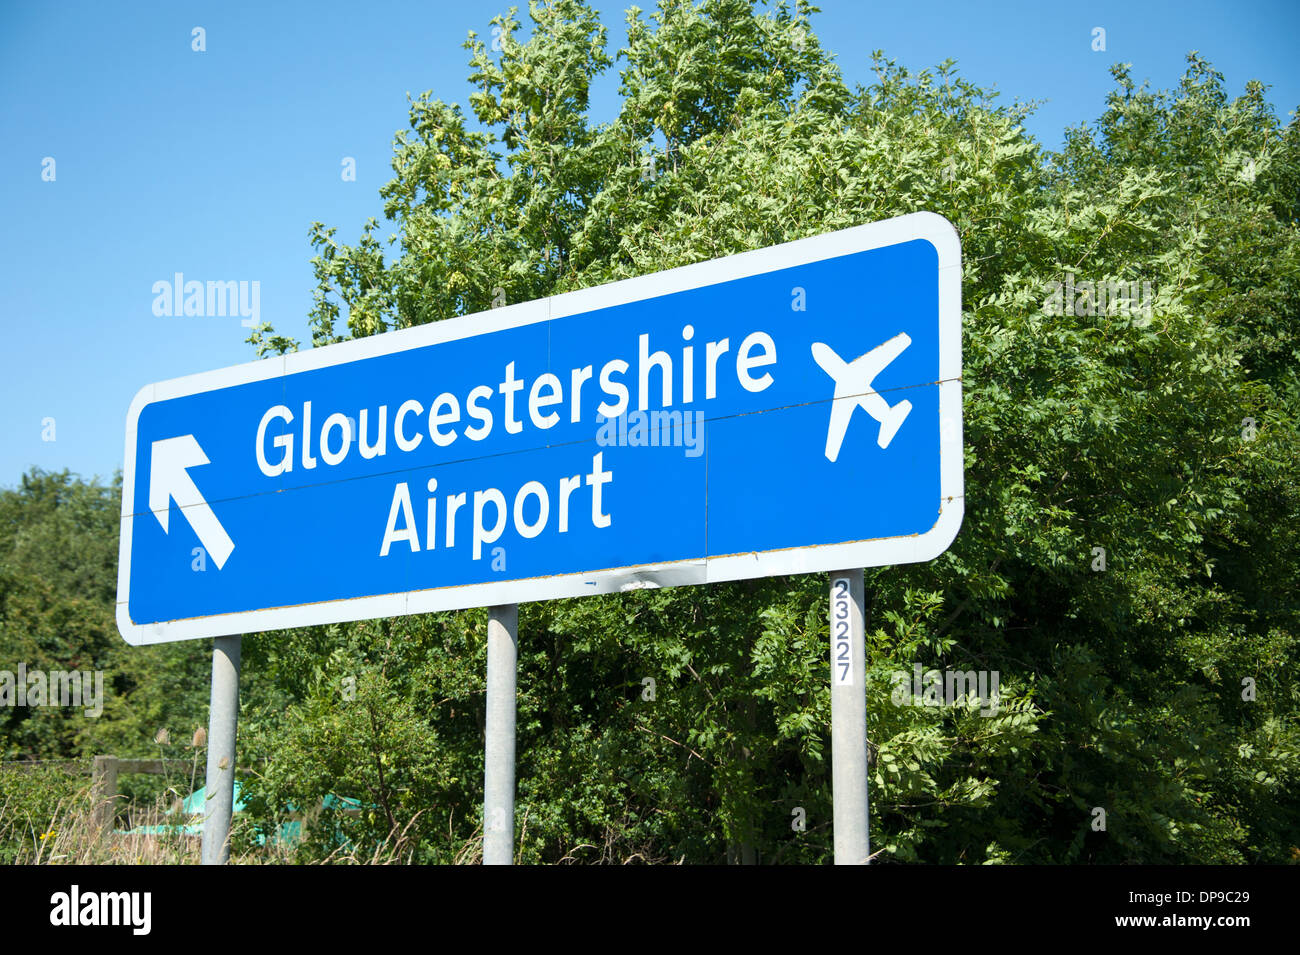 Gloucestershire Airport Sign Blue White Stock Photo